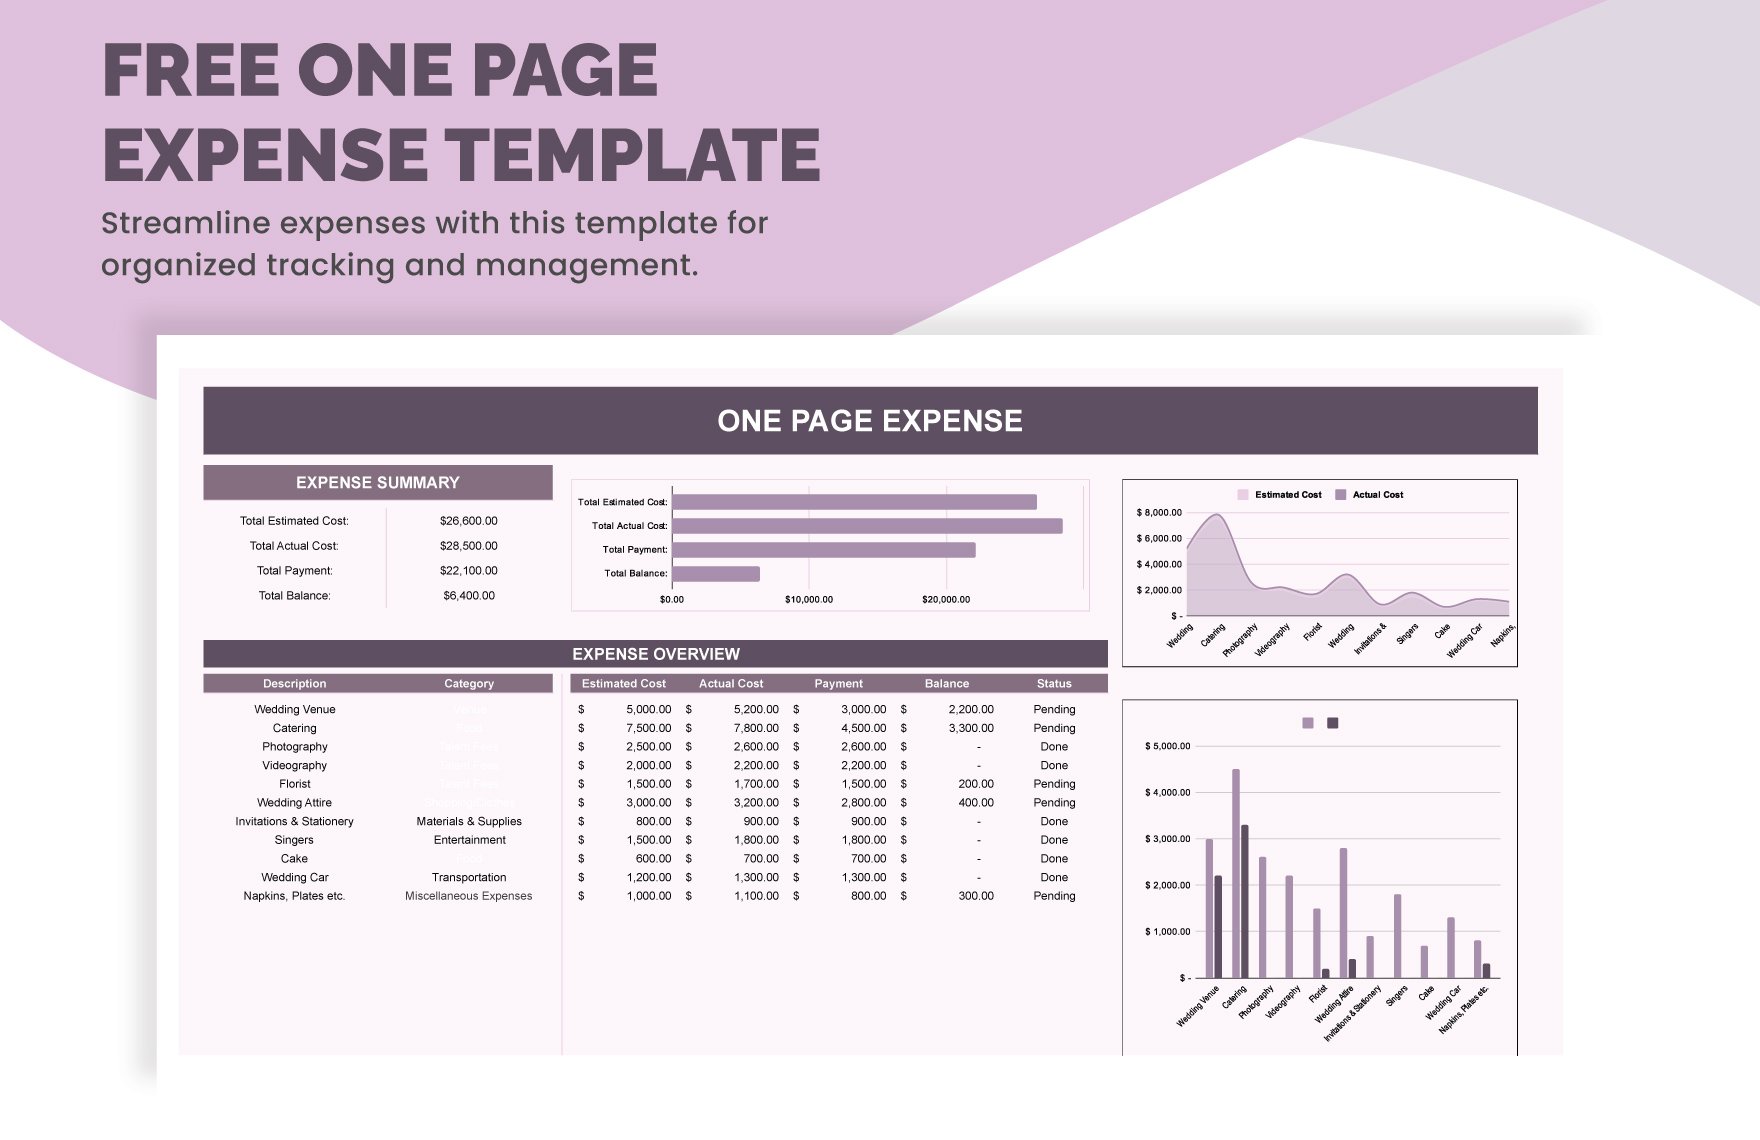 One Page Expense